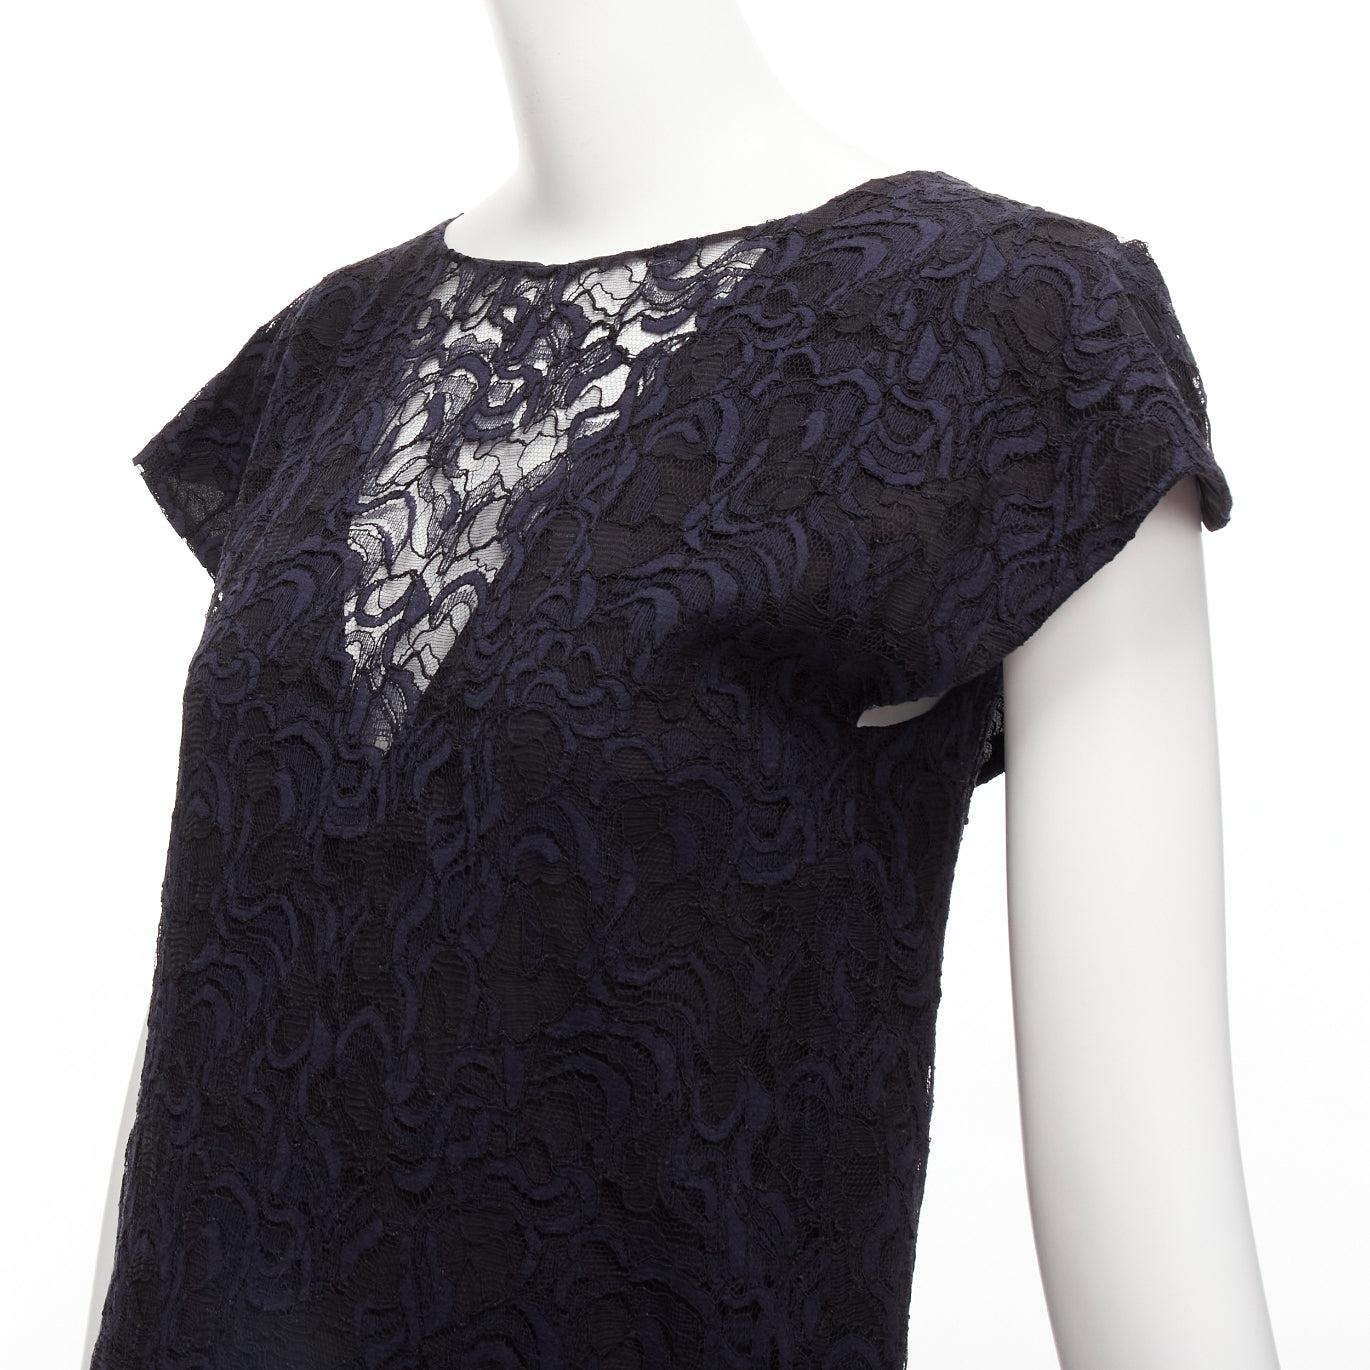 CHRISTIAN DIOR navy black lace overlay V back see through ruffle hem dress
Reference: NILI/A00038
Brand: Dior
Designer: Raf Simons
Material: Lace
Color: Navy, Black
Pattern: Lace
Closure: Zip
Lining: Black Fabric
Made in: